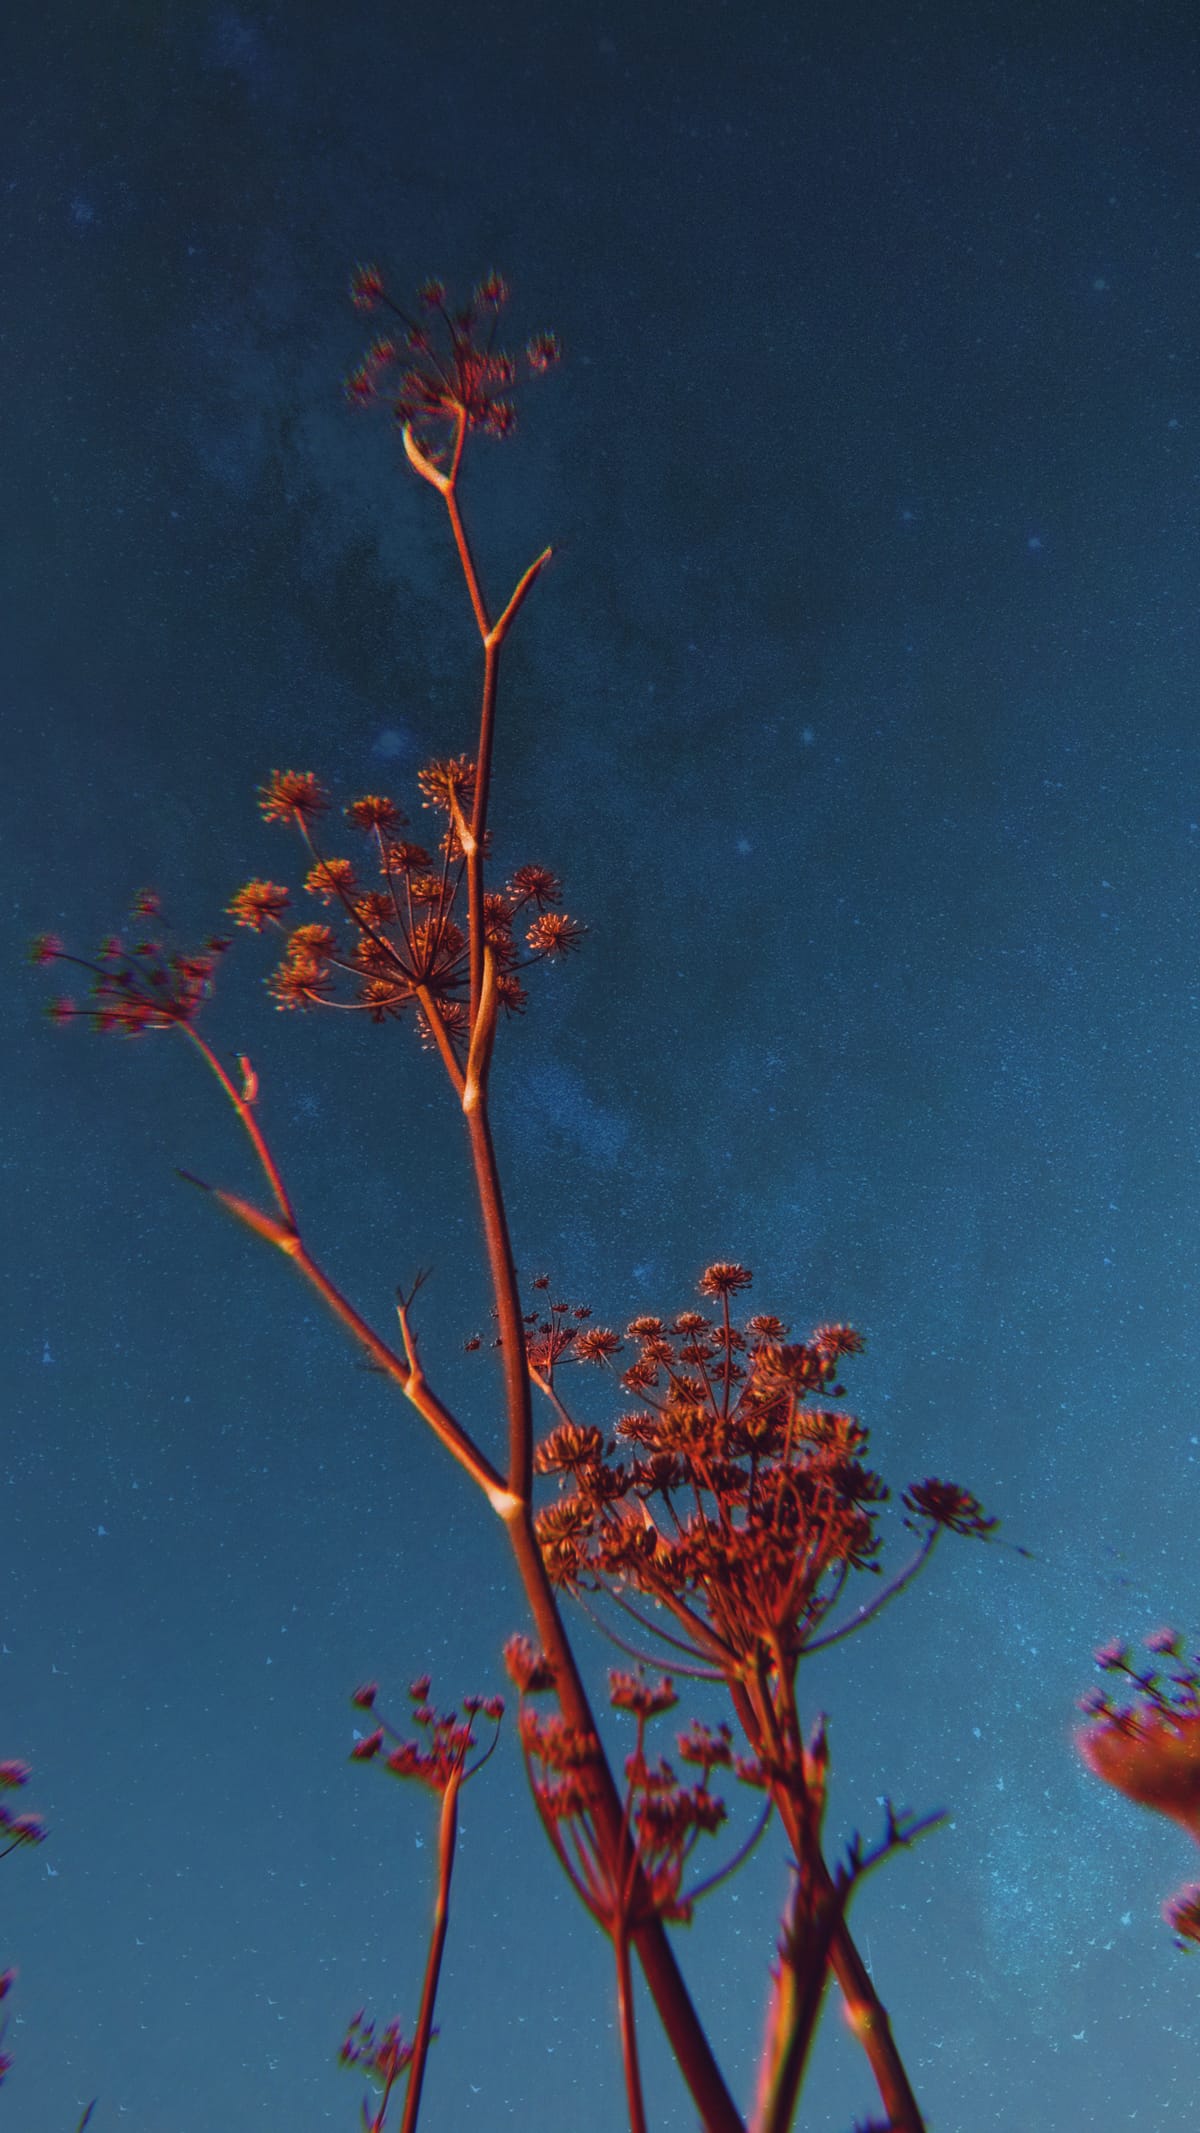 Heavily edited picture of dried Queen Anne's Lace-looking flowers, with lens distortion around edges, altered sky